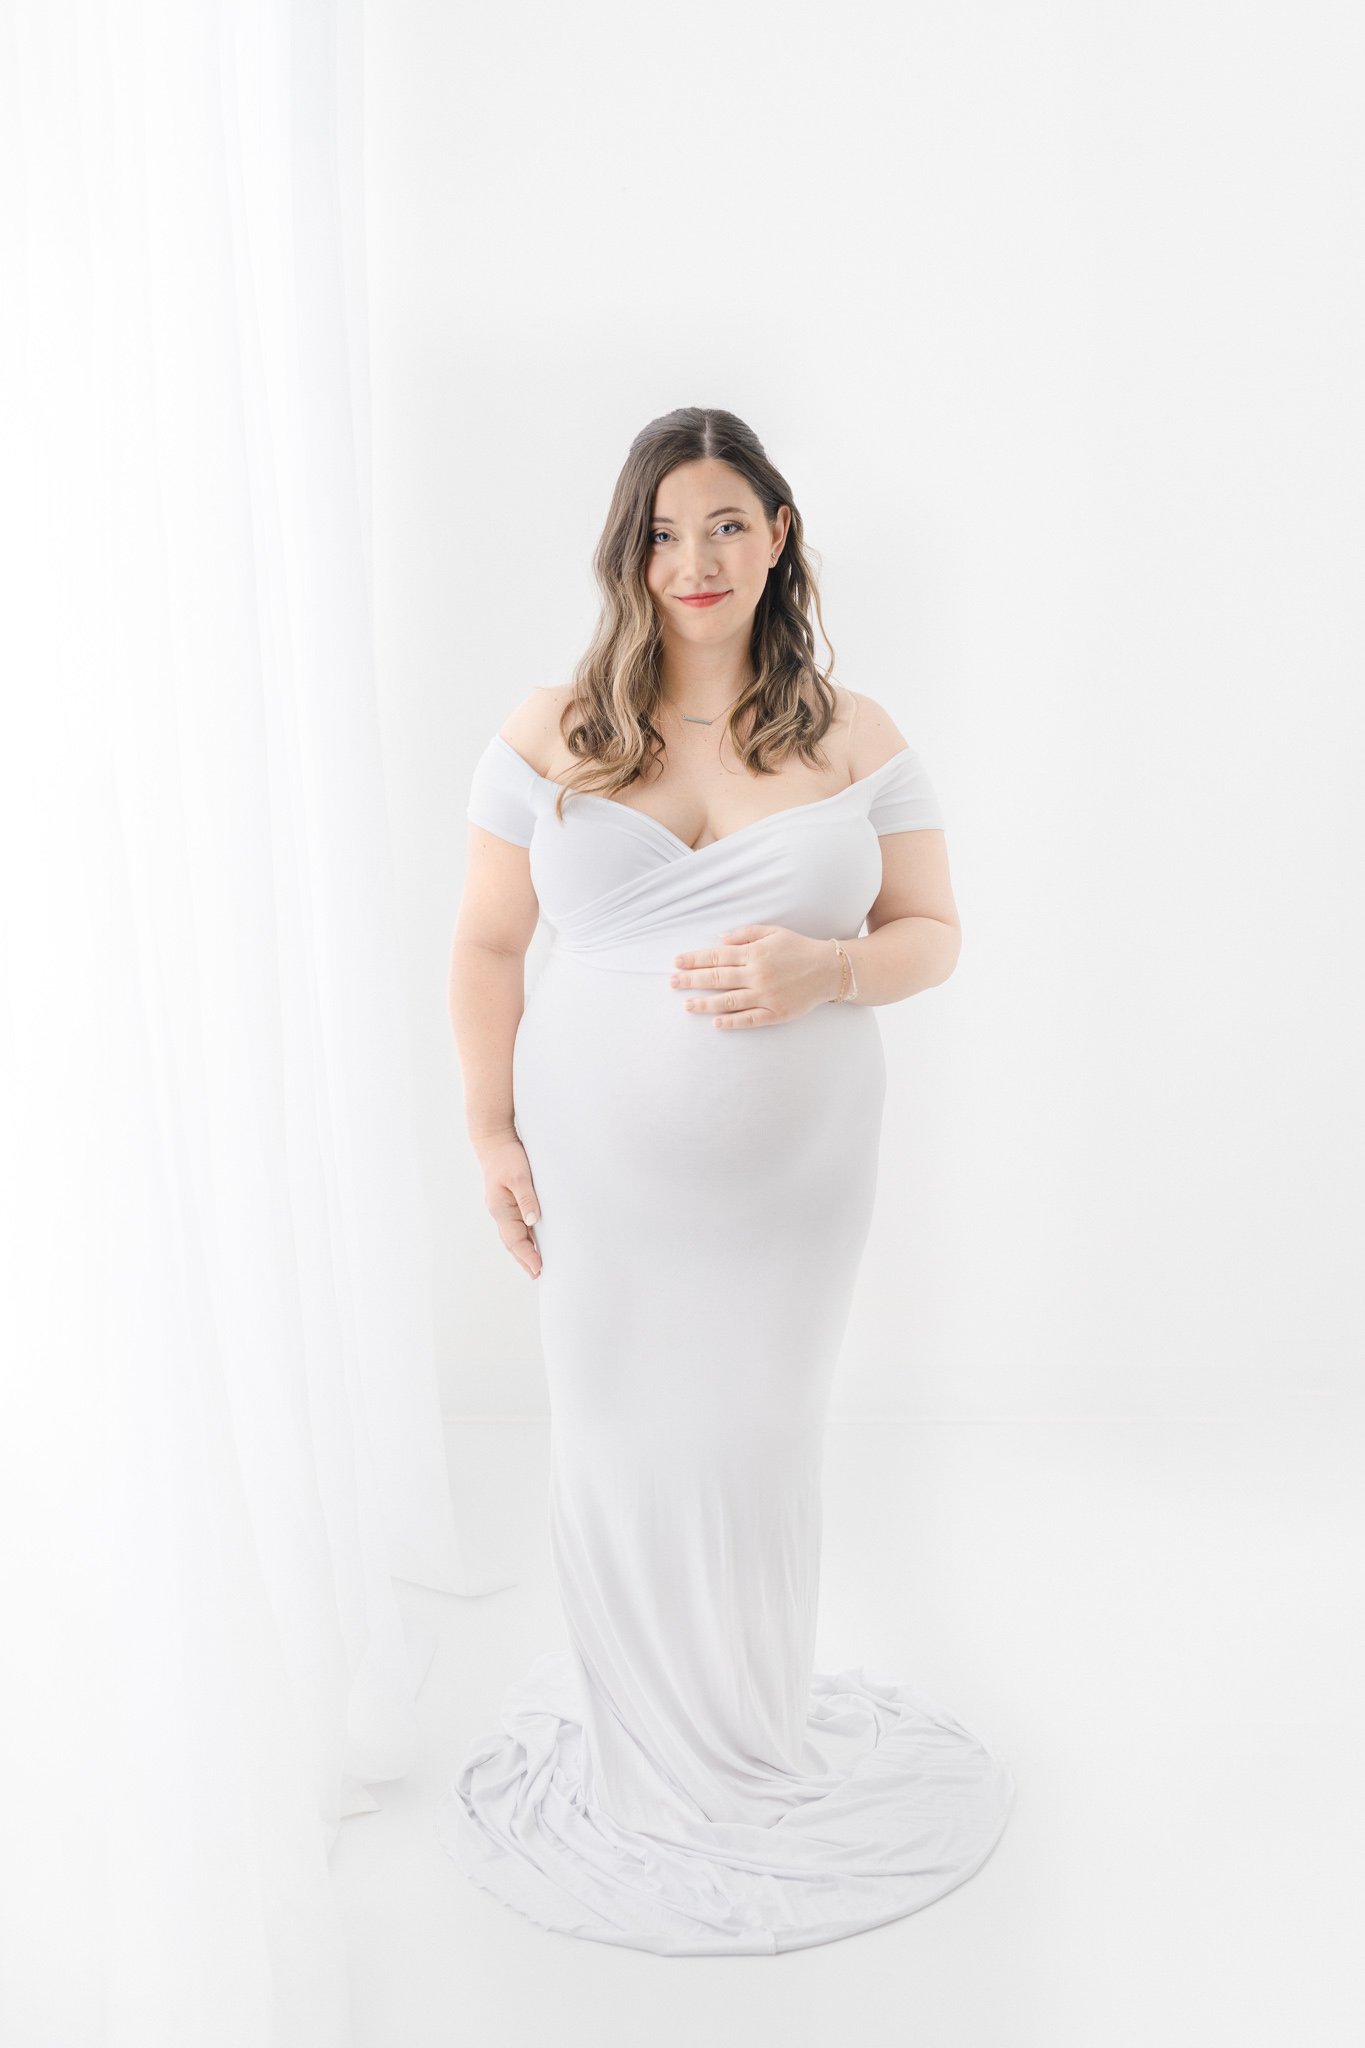  Timeless studio maternity portraits wearing white captured by Nicole Hawkins Photography. timeless maternity portraits #NicoleHawkinsPhotography #NicoleHawkinsMaternity #Babyontheway #studiomaternityNJ #whitestudiomaternityportraits #NYmaternityphot